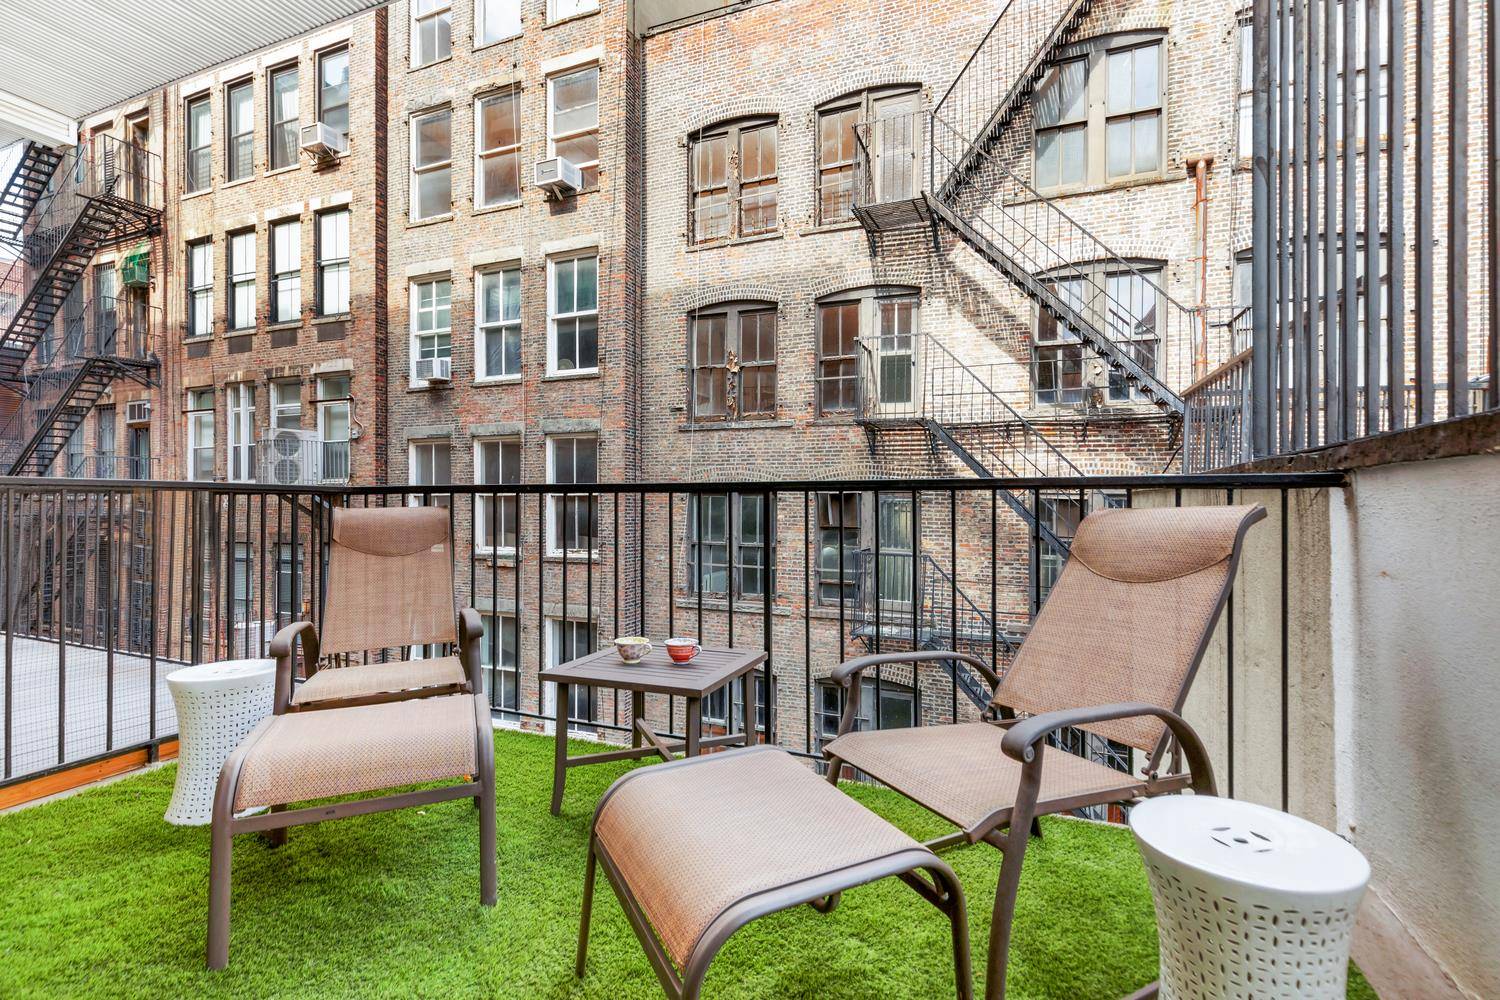 With outdoor space and an amazing location in the heart of Greenwich Village, this home provides the ultimate sanctuary for buyers seeking a tranquil backdrop from the New York City ...